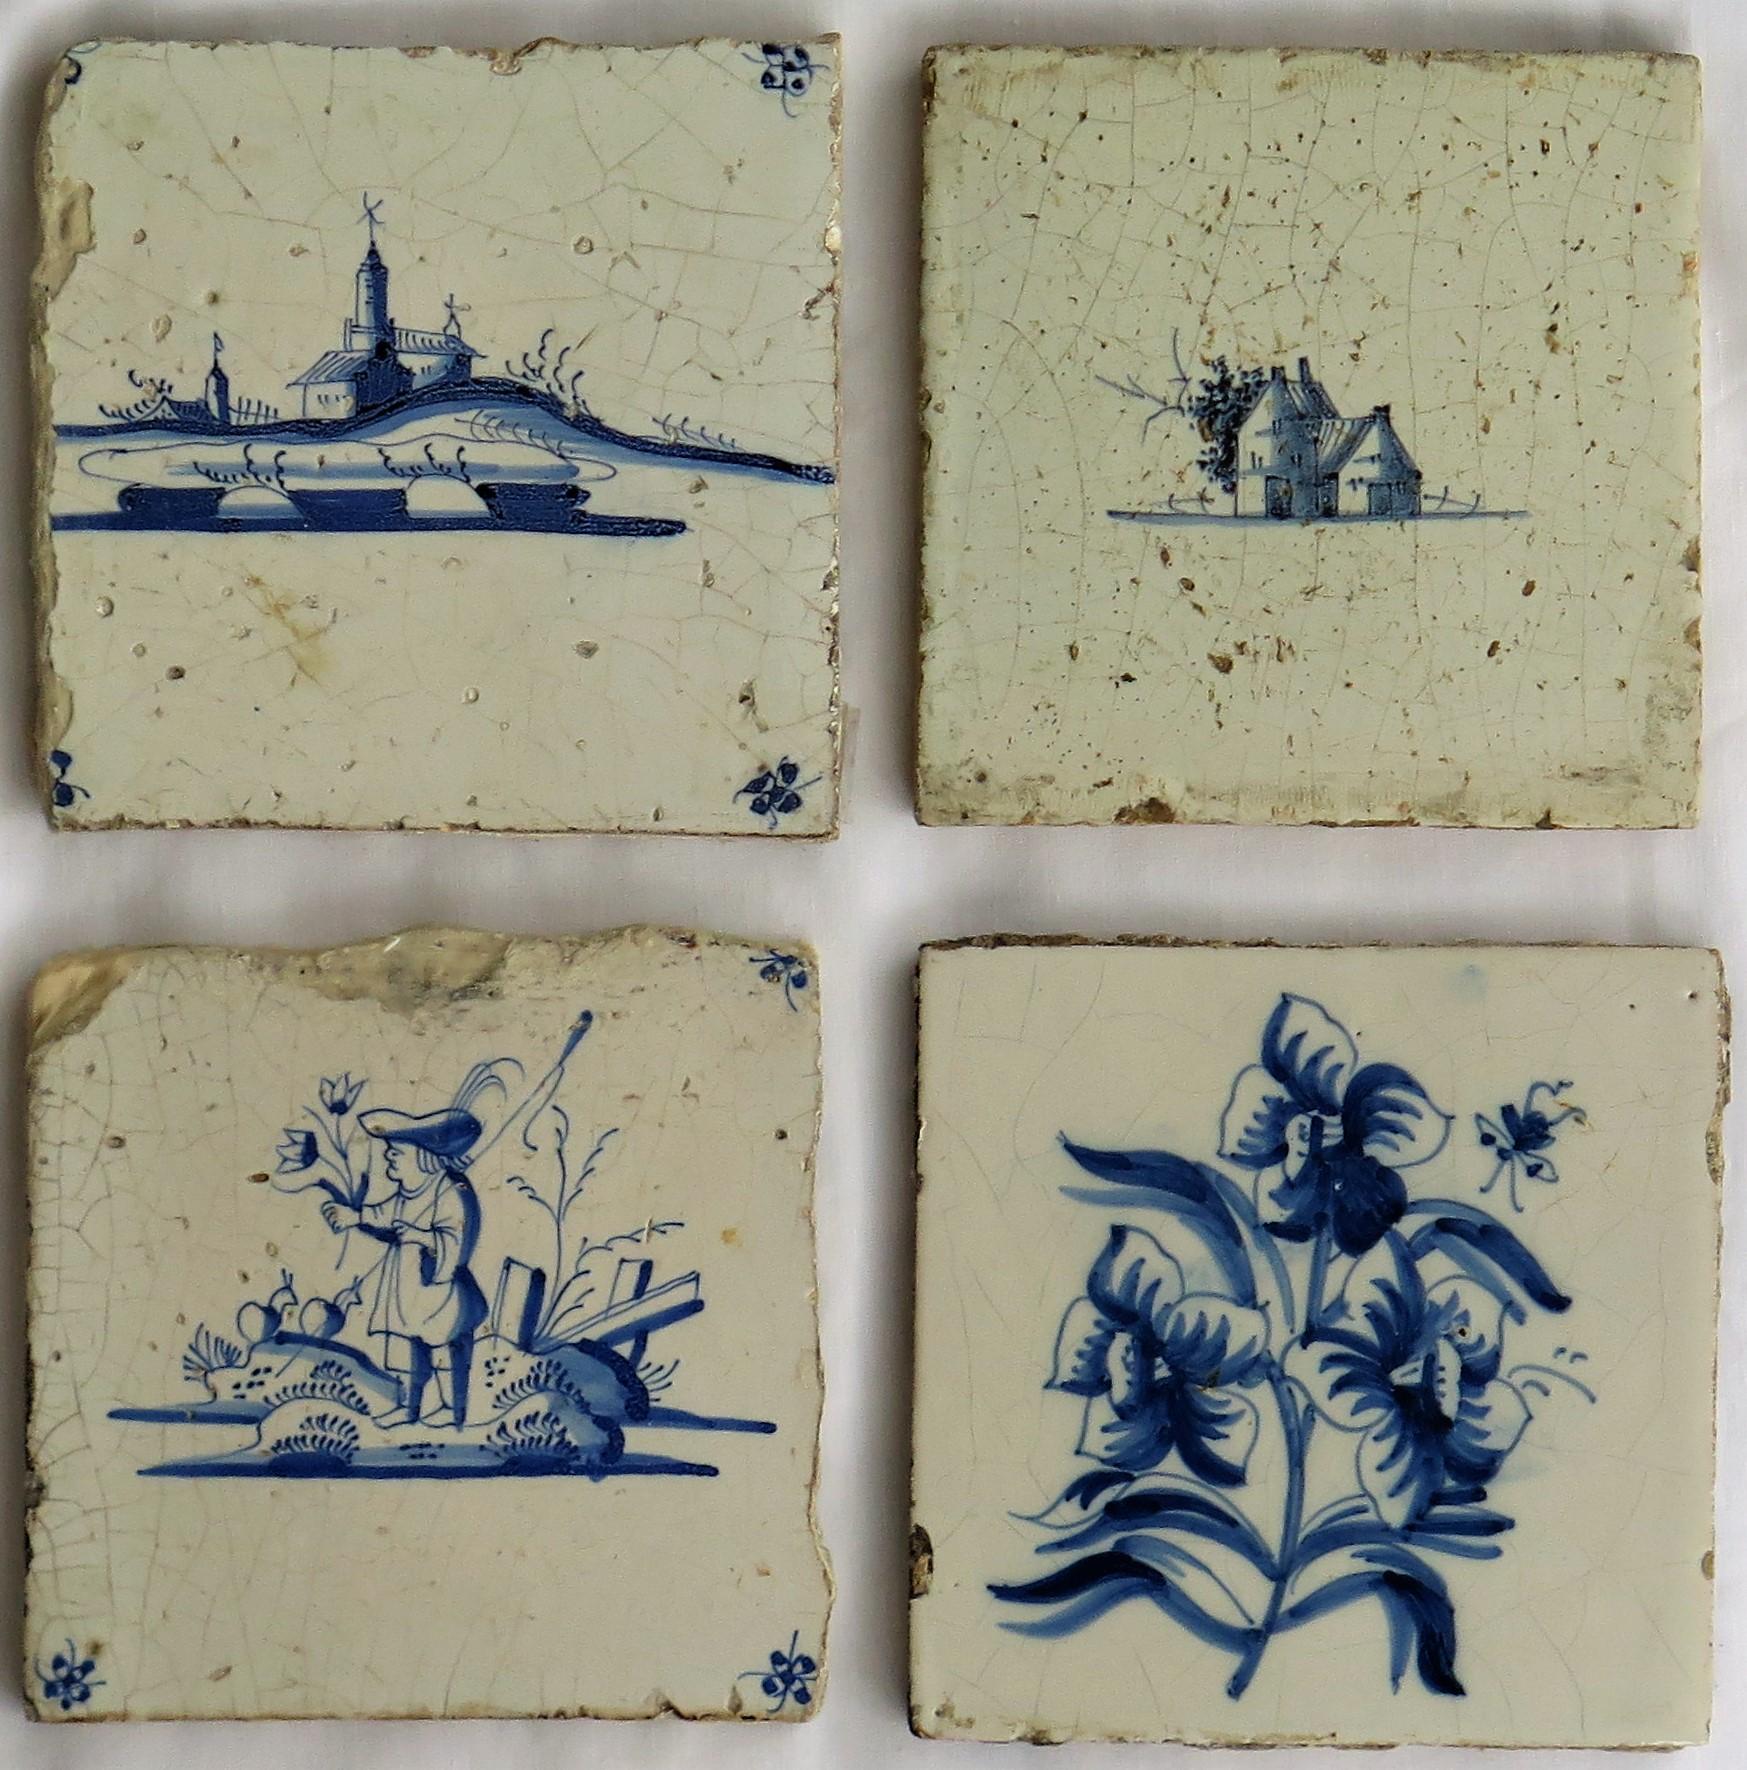 These are four very attractive individual and interesting, Dutch (Netherlands), delft blue and white hand painted ceramic wall tiles dating to the 17th century.

All tiles are nominally 5 inches square and 7/16 inches thick. 

Tile 1- Top left,